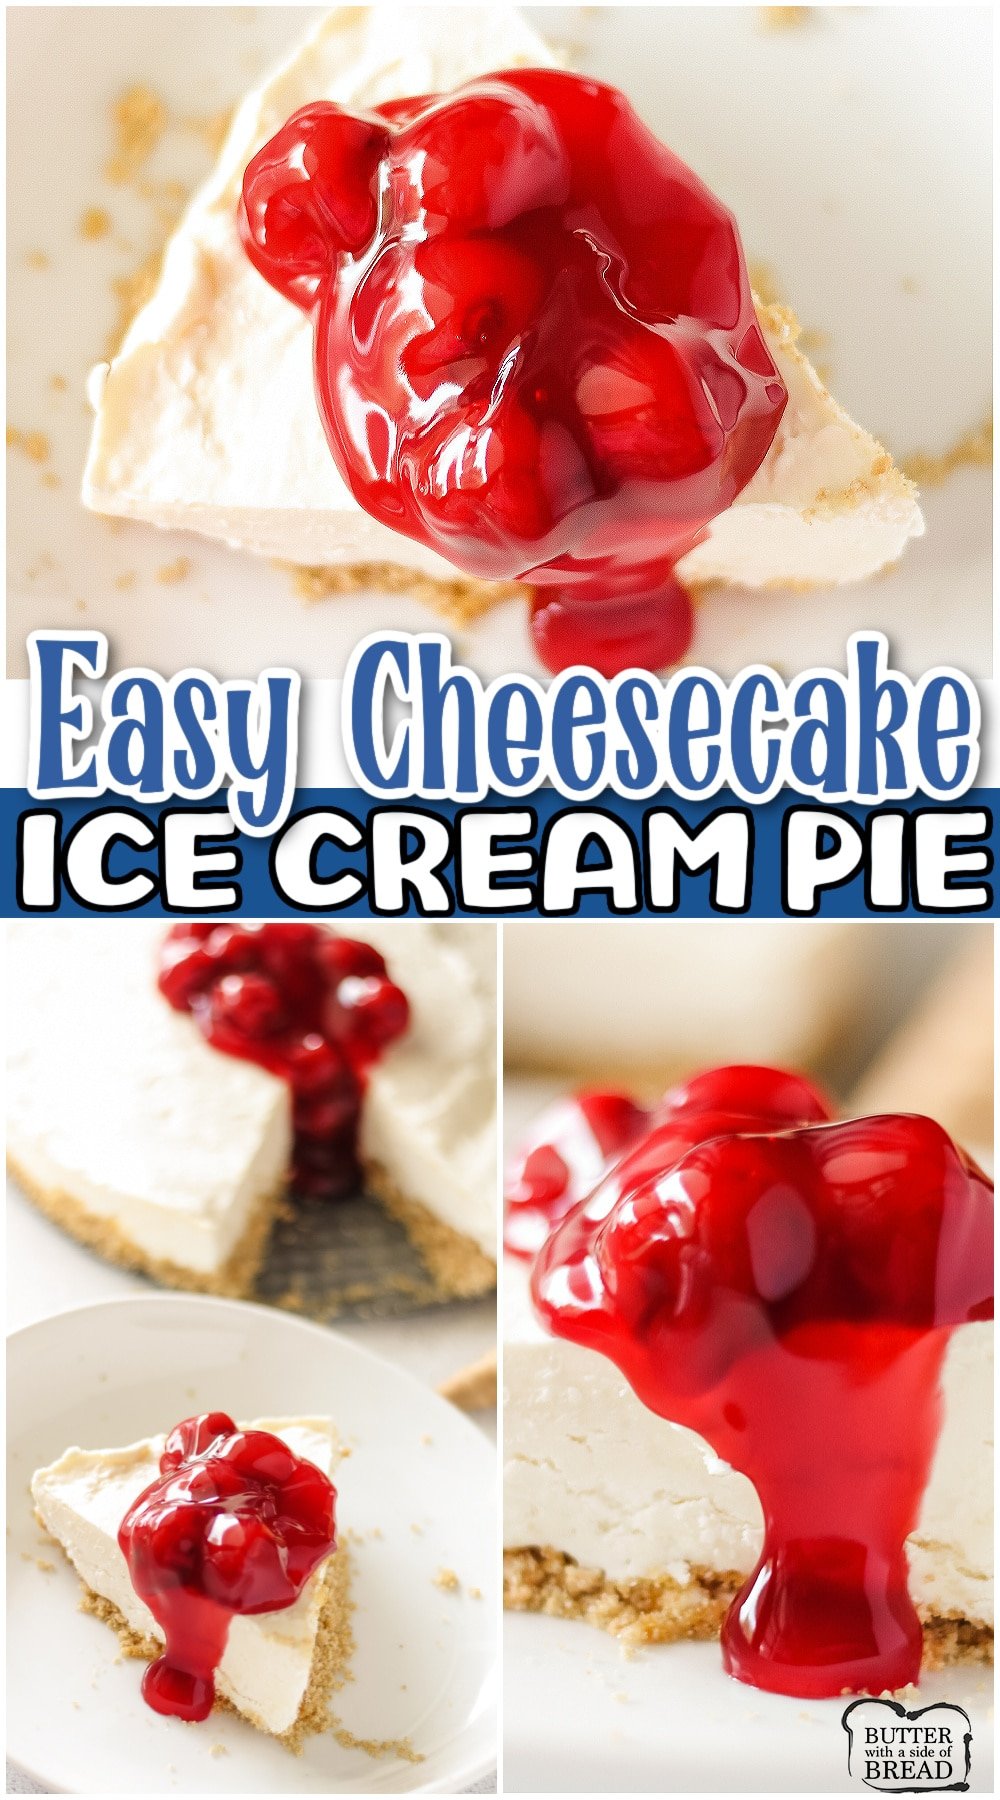 Cheesecake ice cream pie is a delightful cross between classic cheesecake & homemade ice cream! Creamy, rich ice cream pie with cheesecake flavors & topped with cherries, of course!